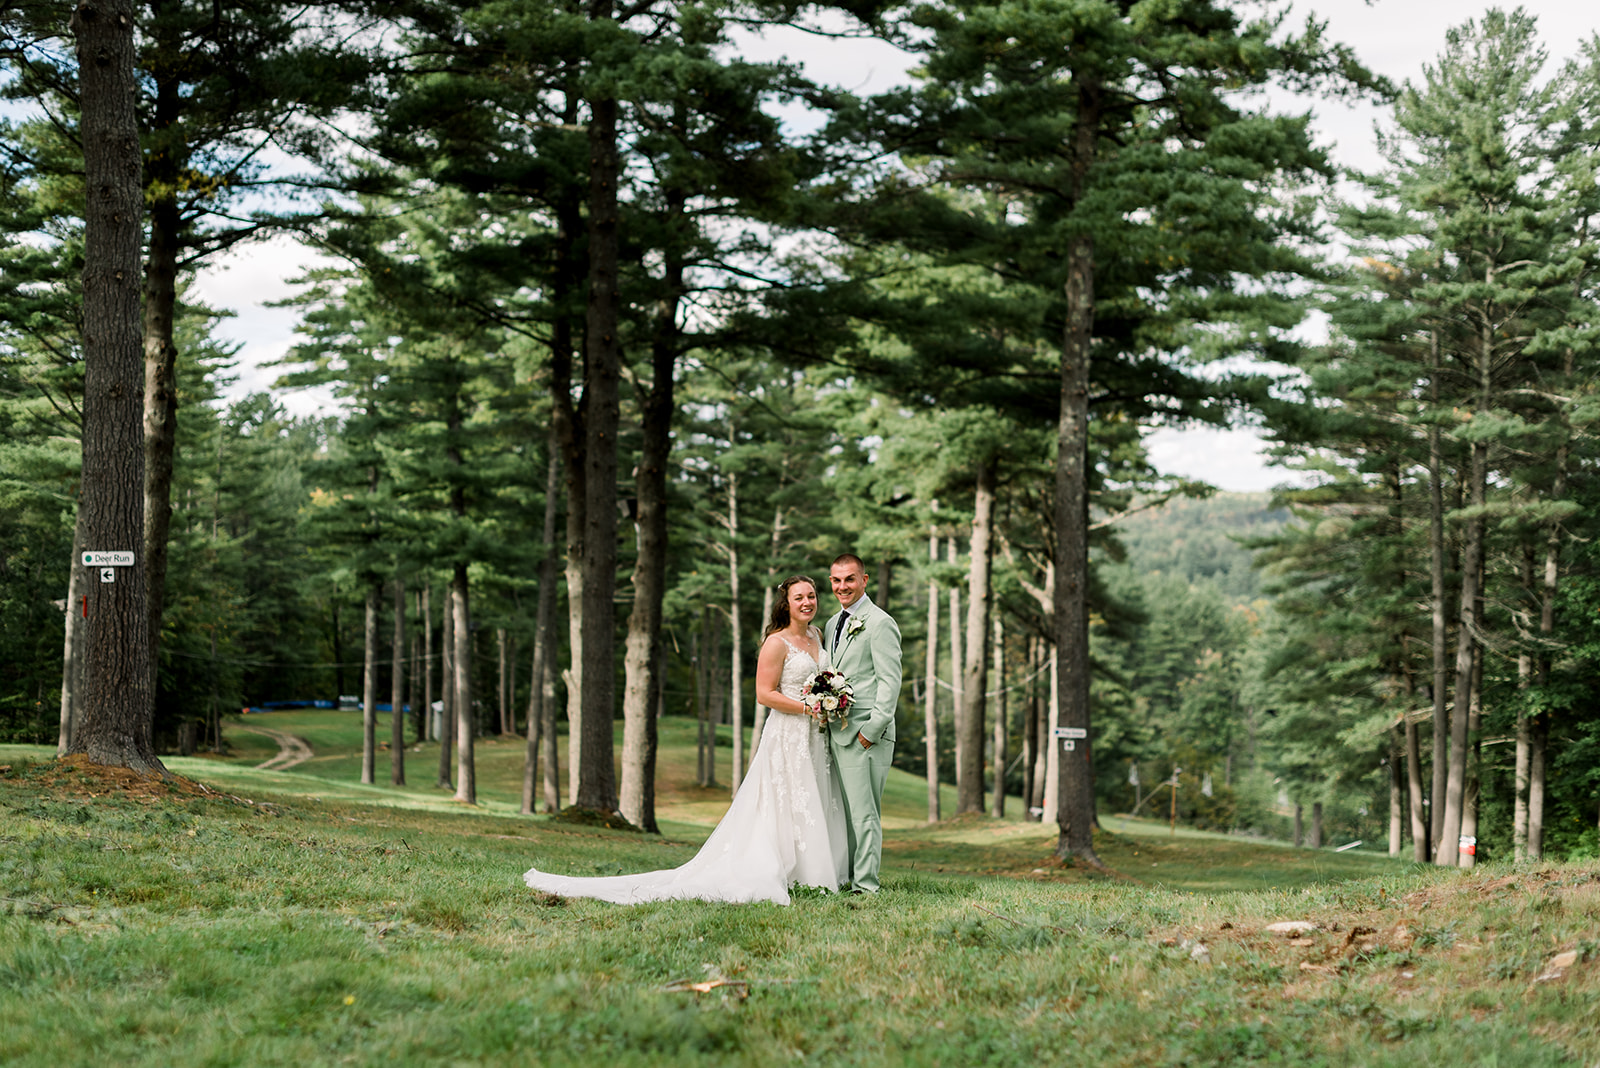 A beautiful wedding on top of Bull Moose Trail at Lost Valley Ski Resort in Auburn, ME.

Molly Breton & Co.